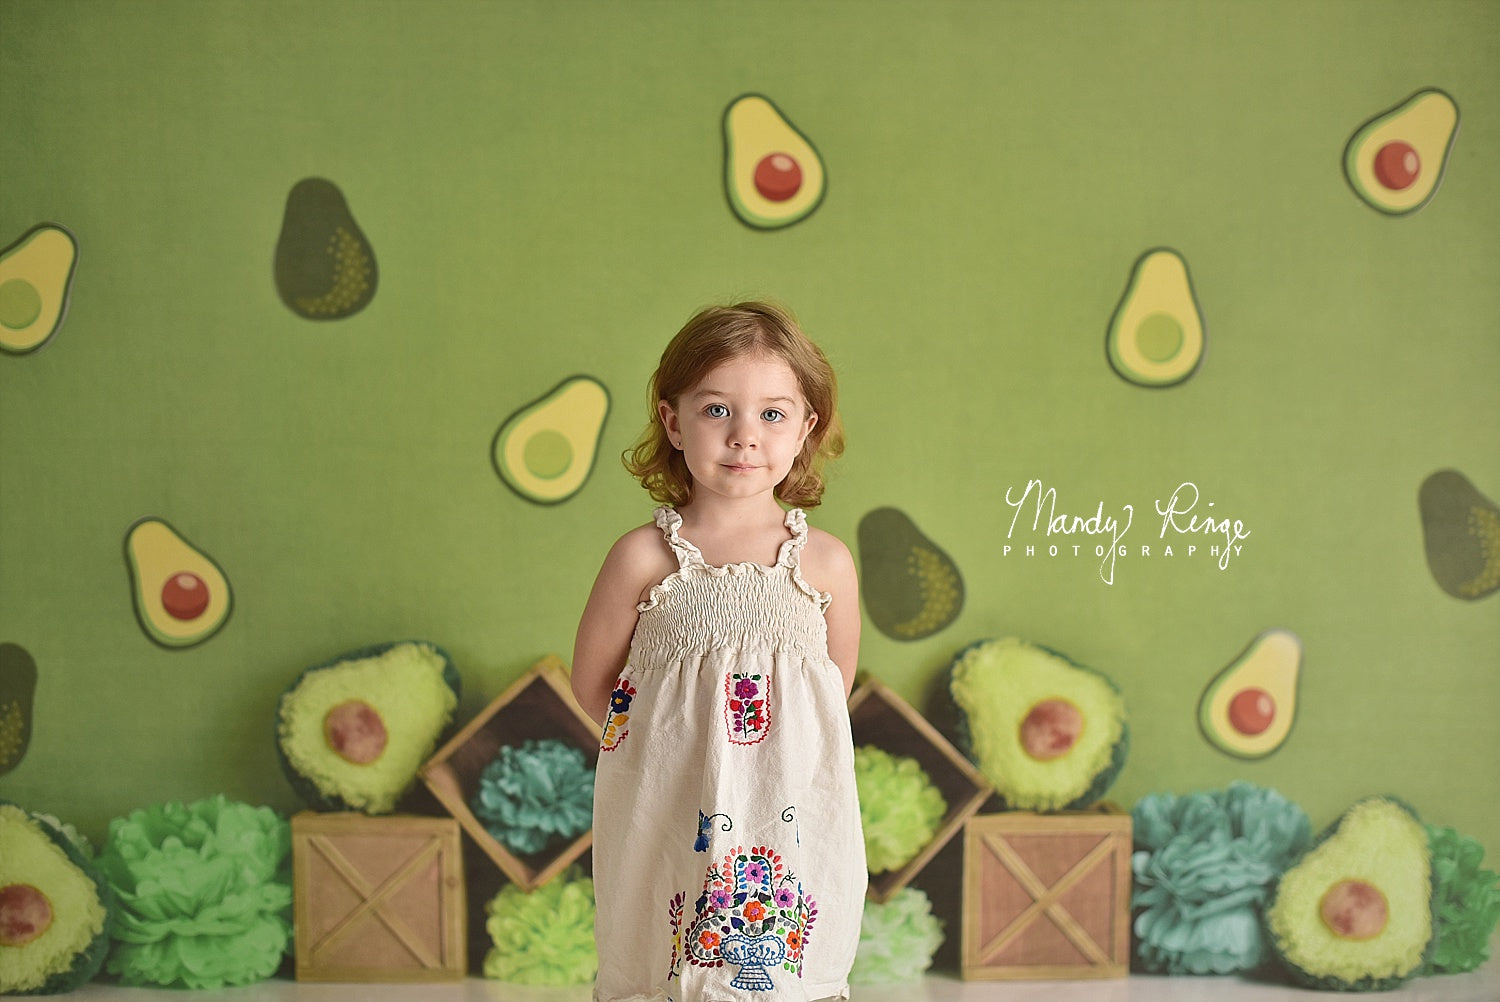 Kate Green Avocado Party Children Summer Backdrop Designed By Mandy Ringe Photography